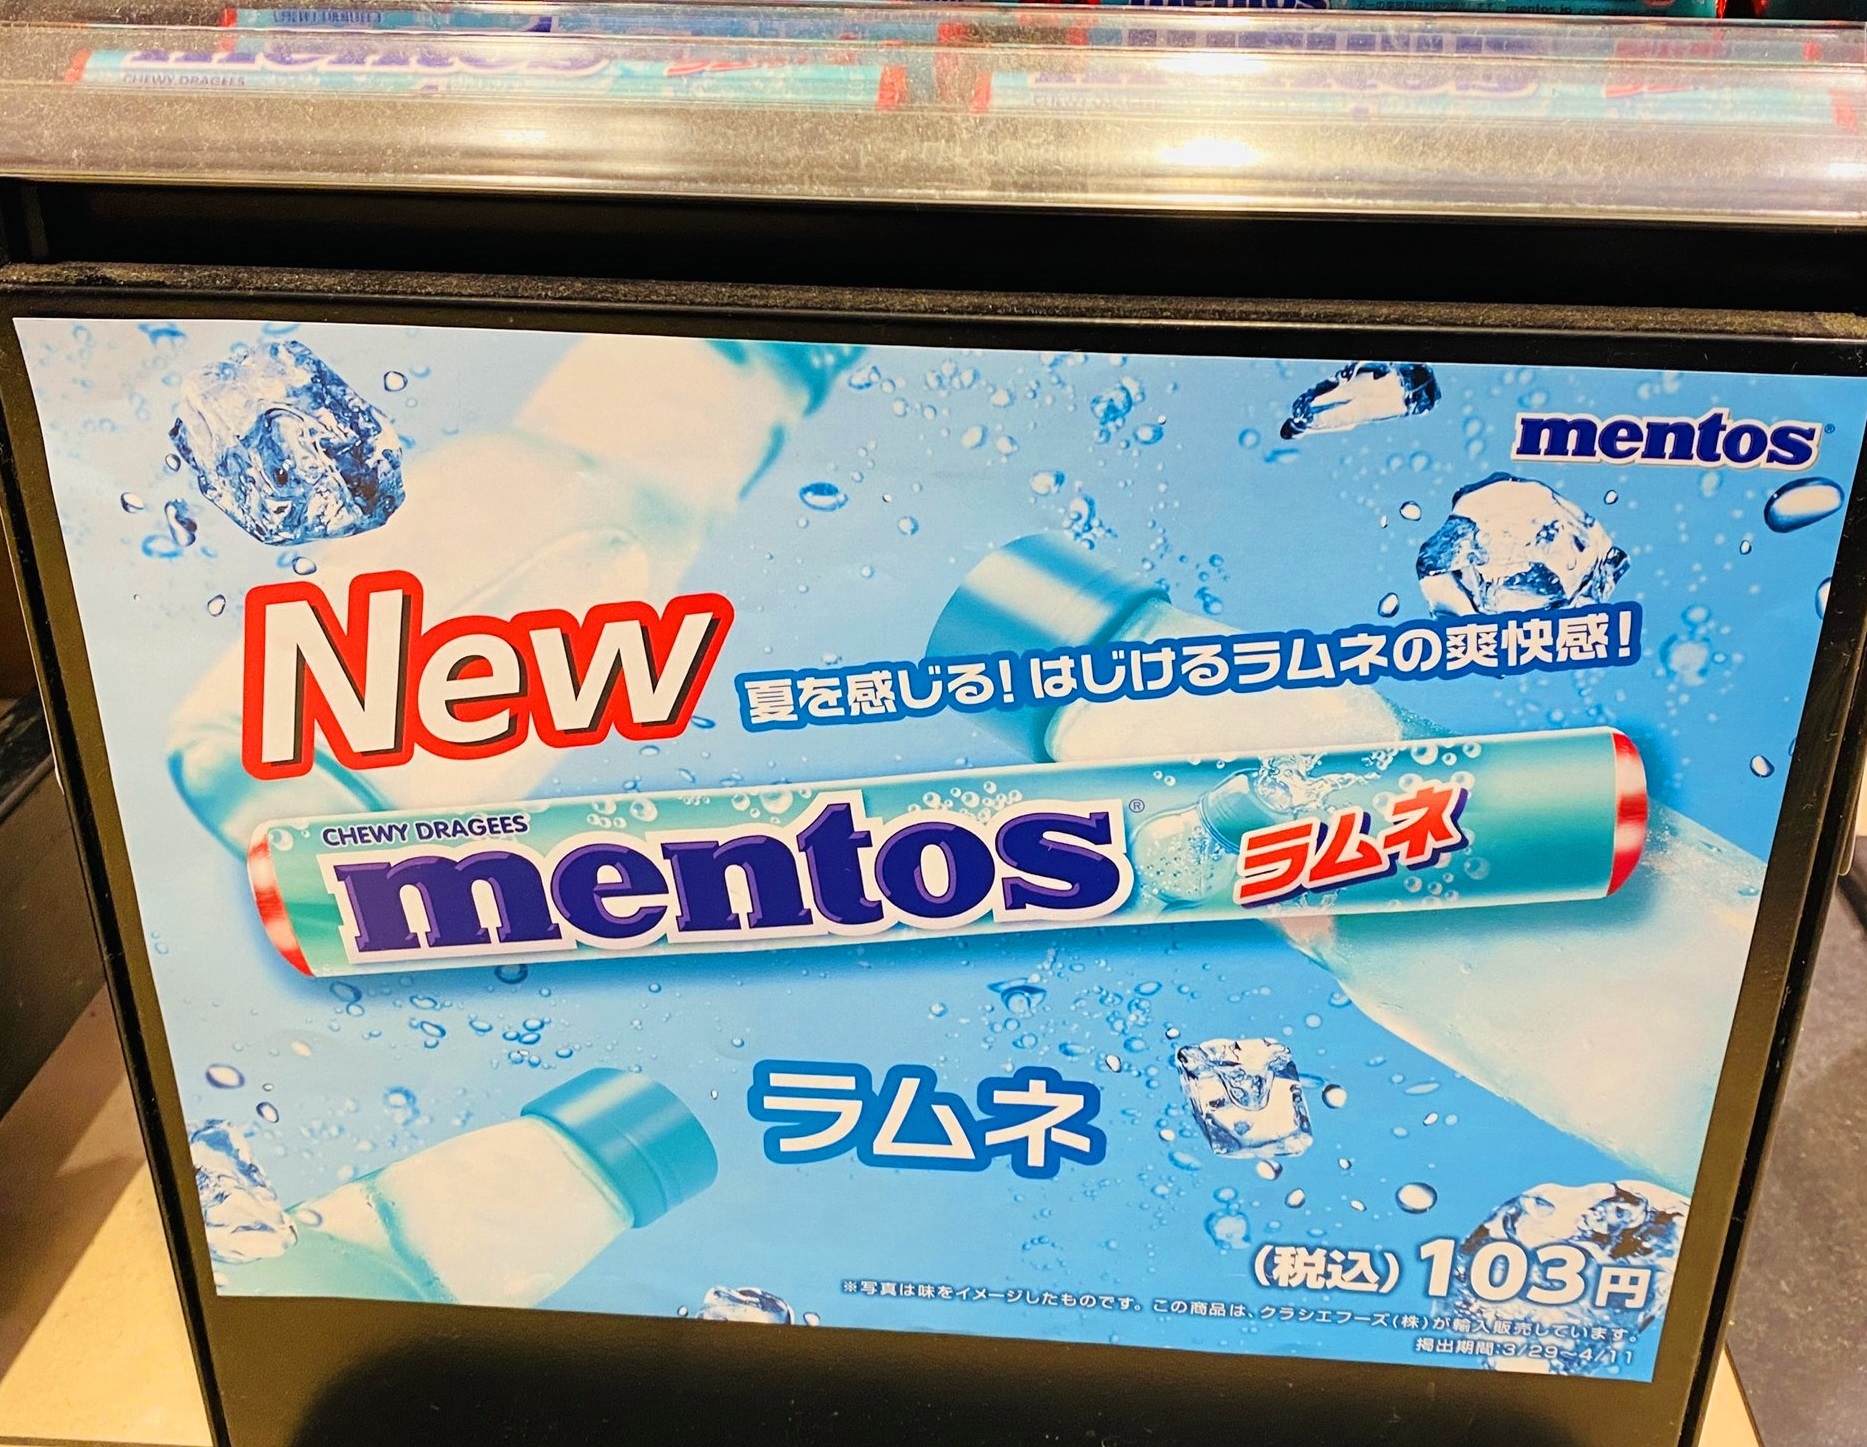 New Chewy Dragees Mentos Ramune